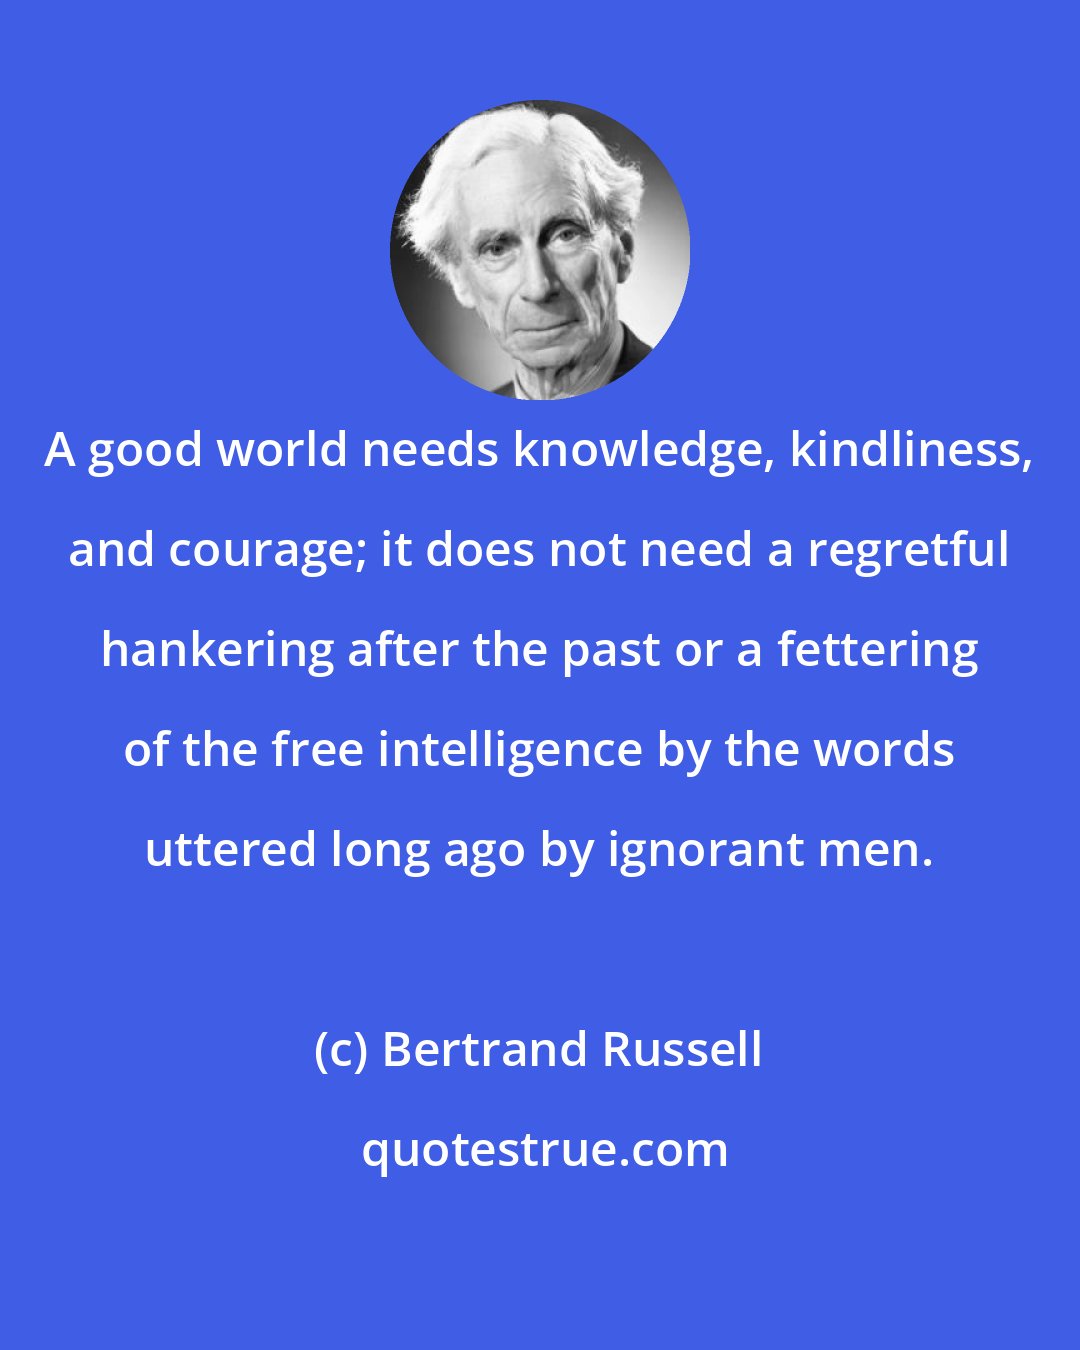 Bertrand Russell: A good world needs knowledge, kindliness, and courage; it does not need a regretful hankering after the past or a fettering of the free intelligence by the words uttered long ago by ignorant men.